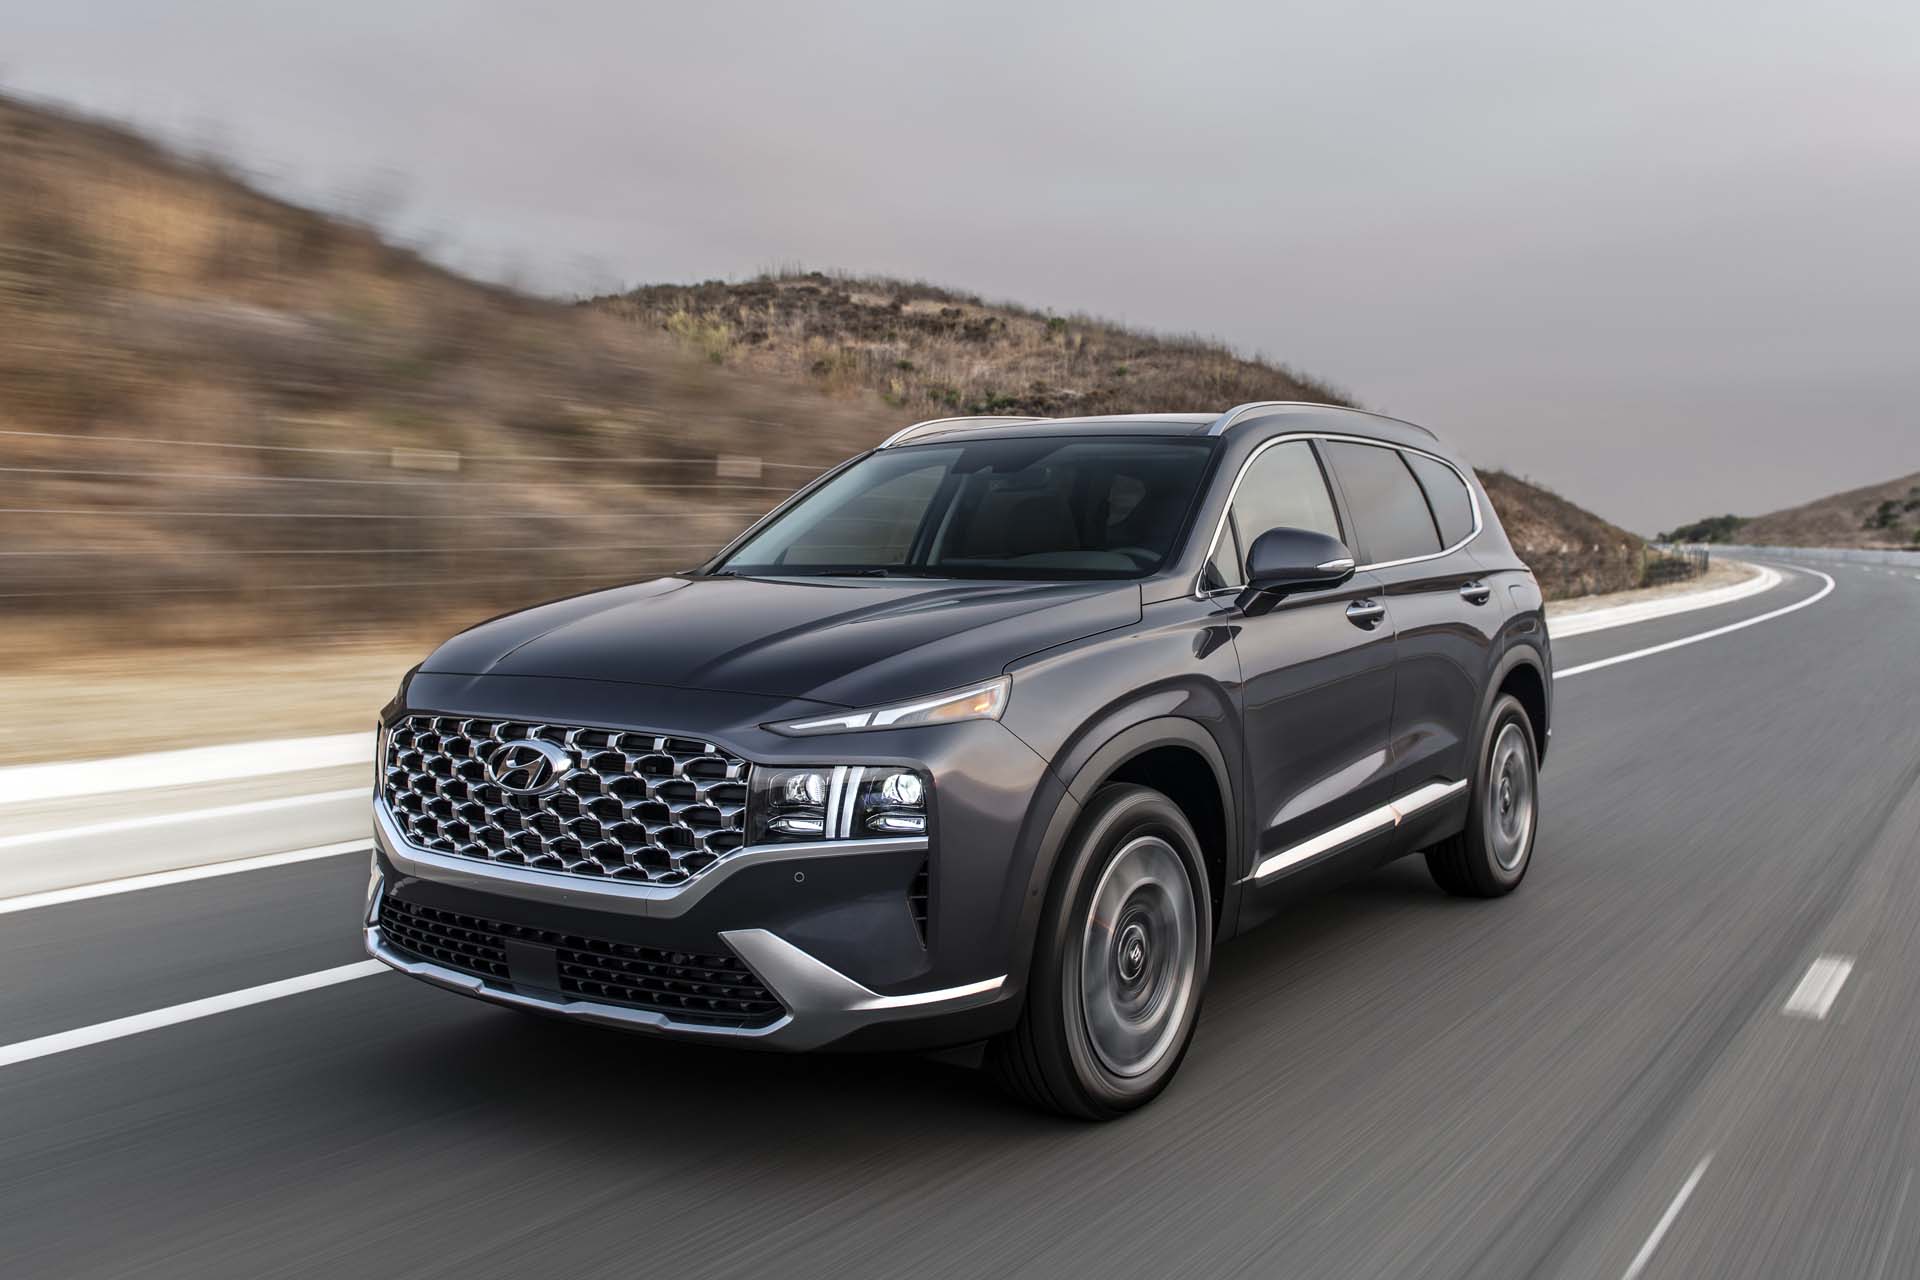 2021 Hyundai Santa Fe Review Ratings Specs Prices and Photos The 